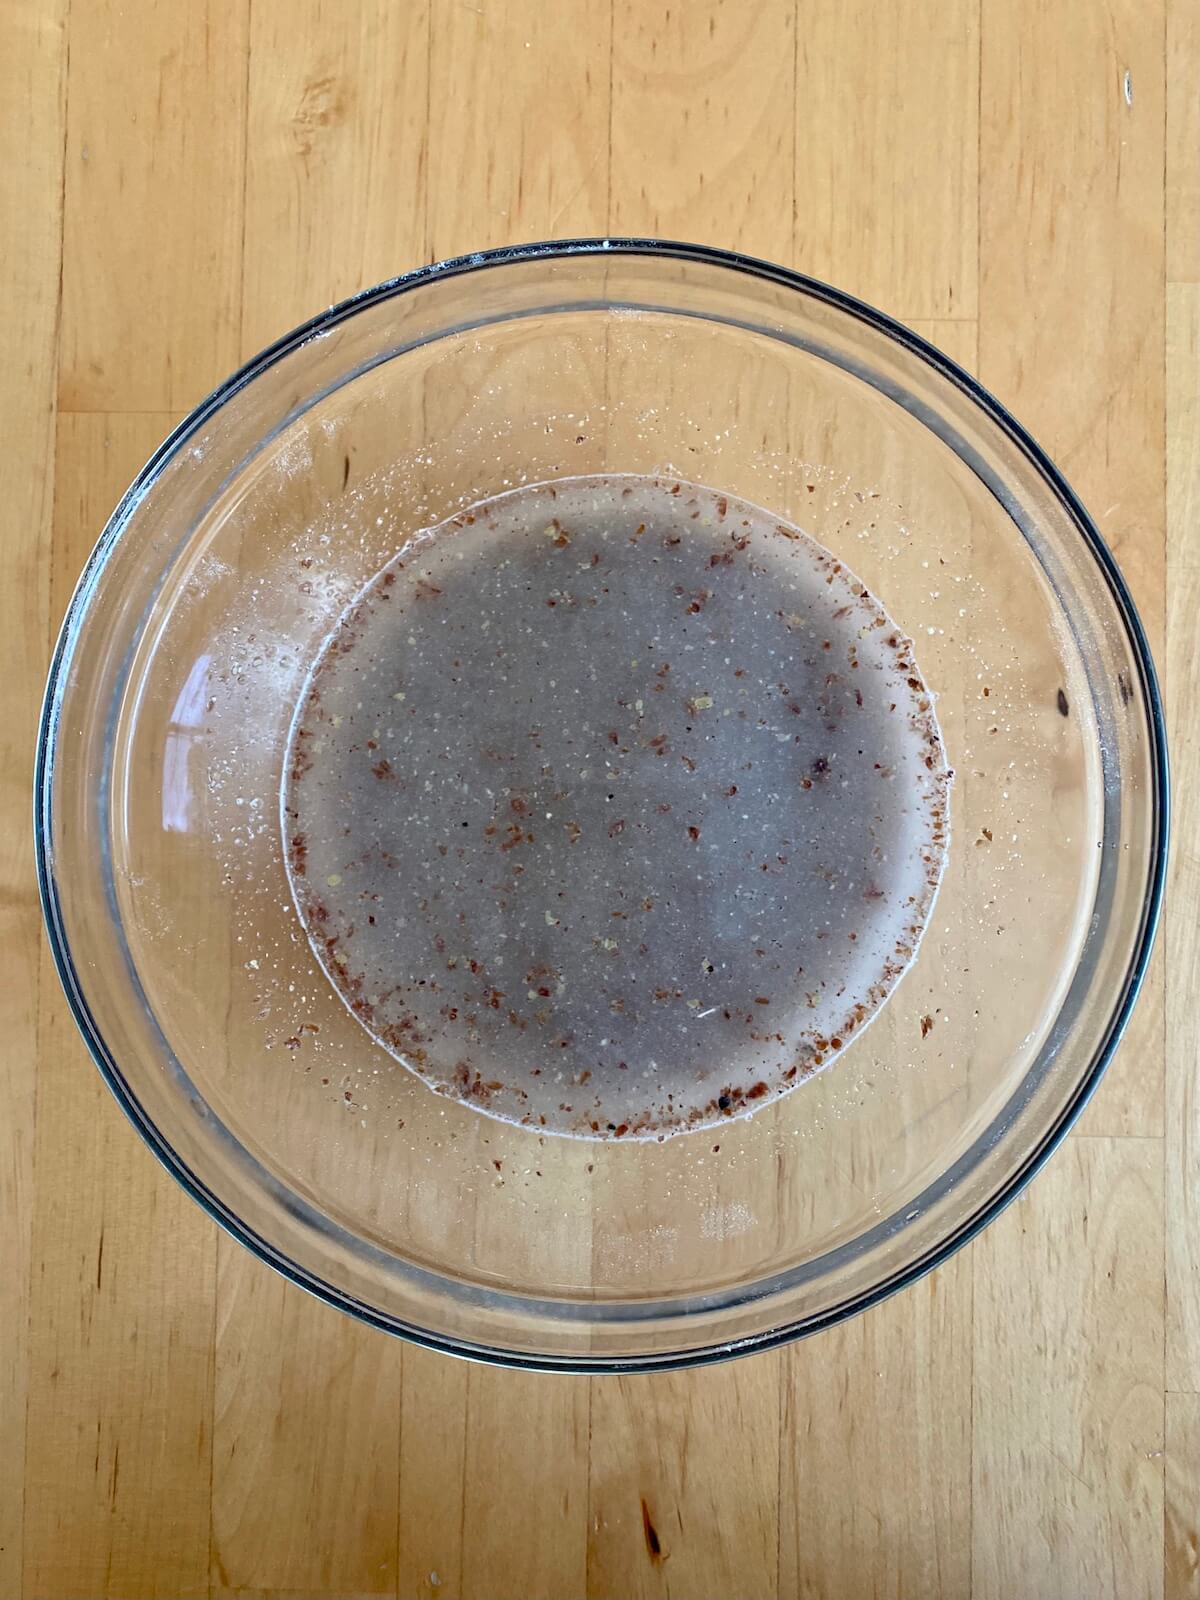 Ground flaxseed and water mixed together in a clear glass bowl.